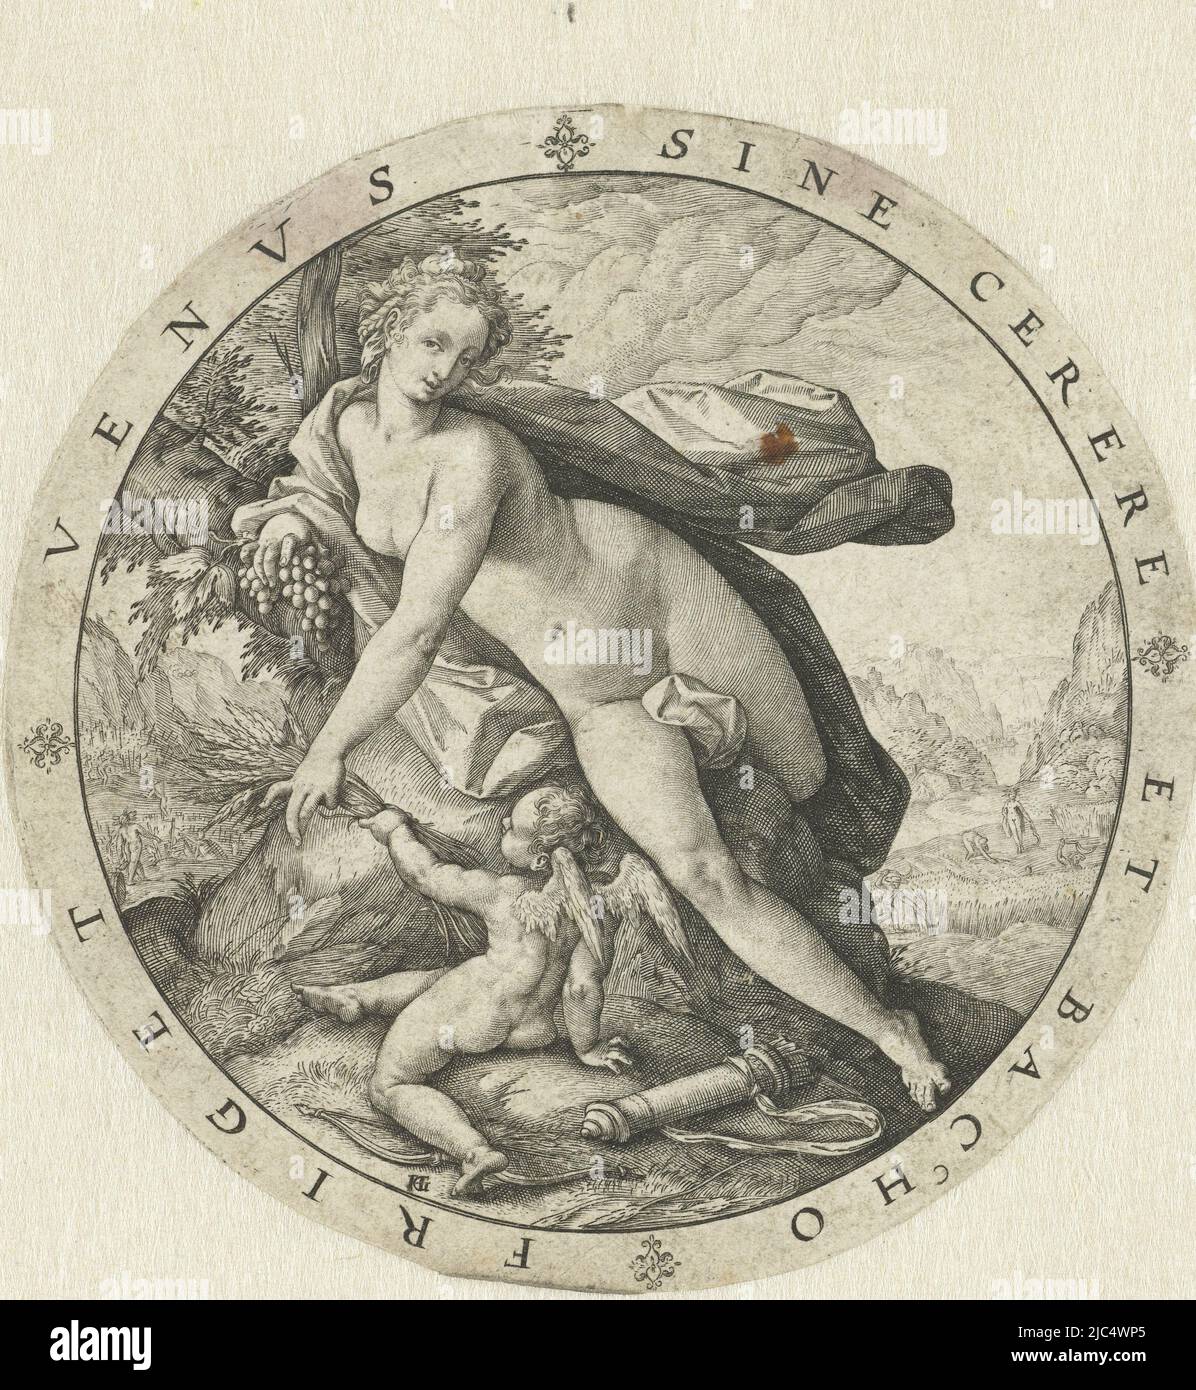 Round depiction of Venus and Cupid near a tree. Venus holds a bunch of grapes, Cupid hands her a bundle of grain. In the background Ceres amidst grain harvesters and Bacchus amidst grape pickers. Around the scene an empty margin, intended for an edge inscription., Venus and Cupid Sine Cerere et Baccho friget Venus , print maker: Hendrick Goltzius, (mentioned on object), Agostino Carracci, publisher: Hendrick Goltzius, Haarlem, 1588 - 1592, paper, engraving, d 95 mm Stock Photo